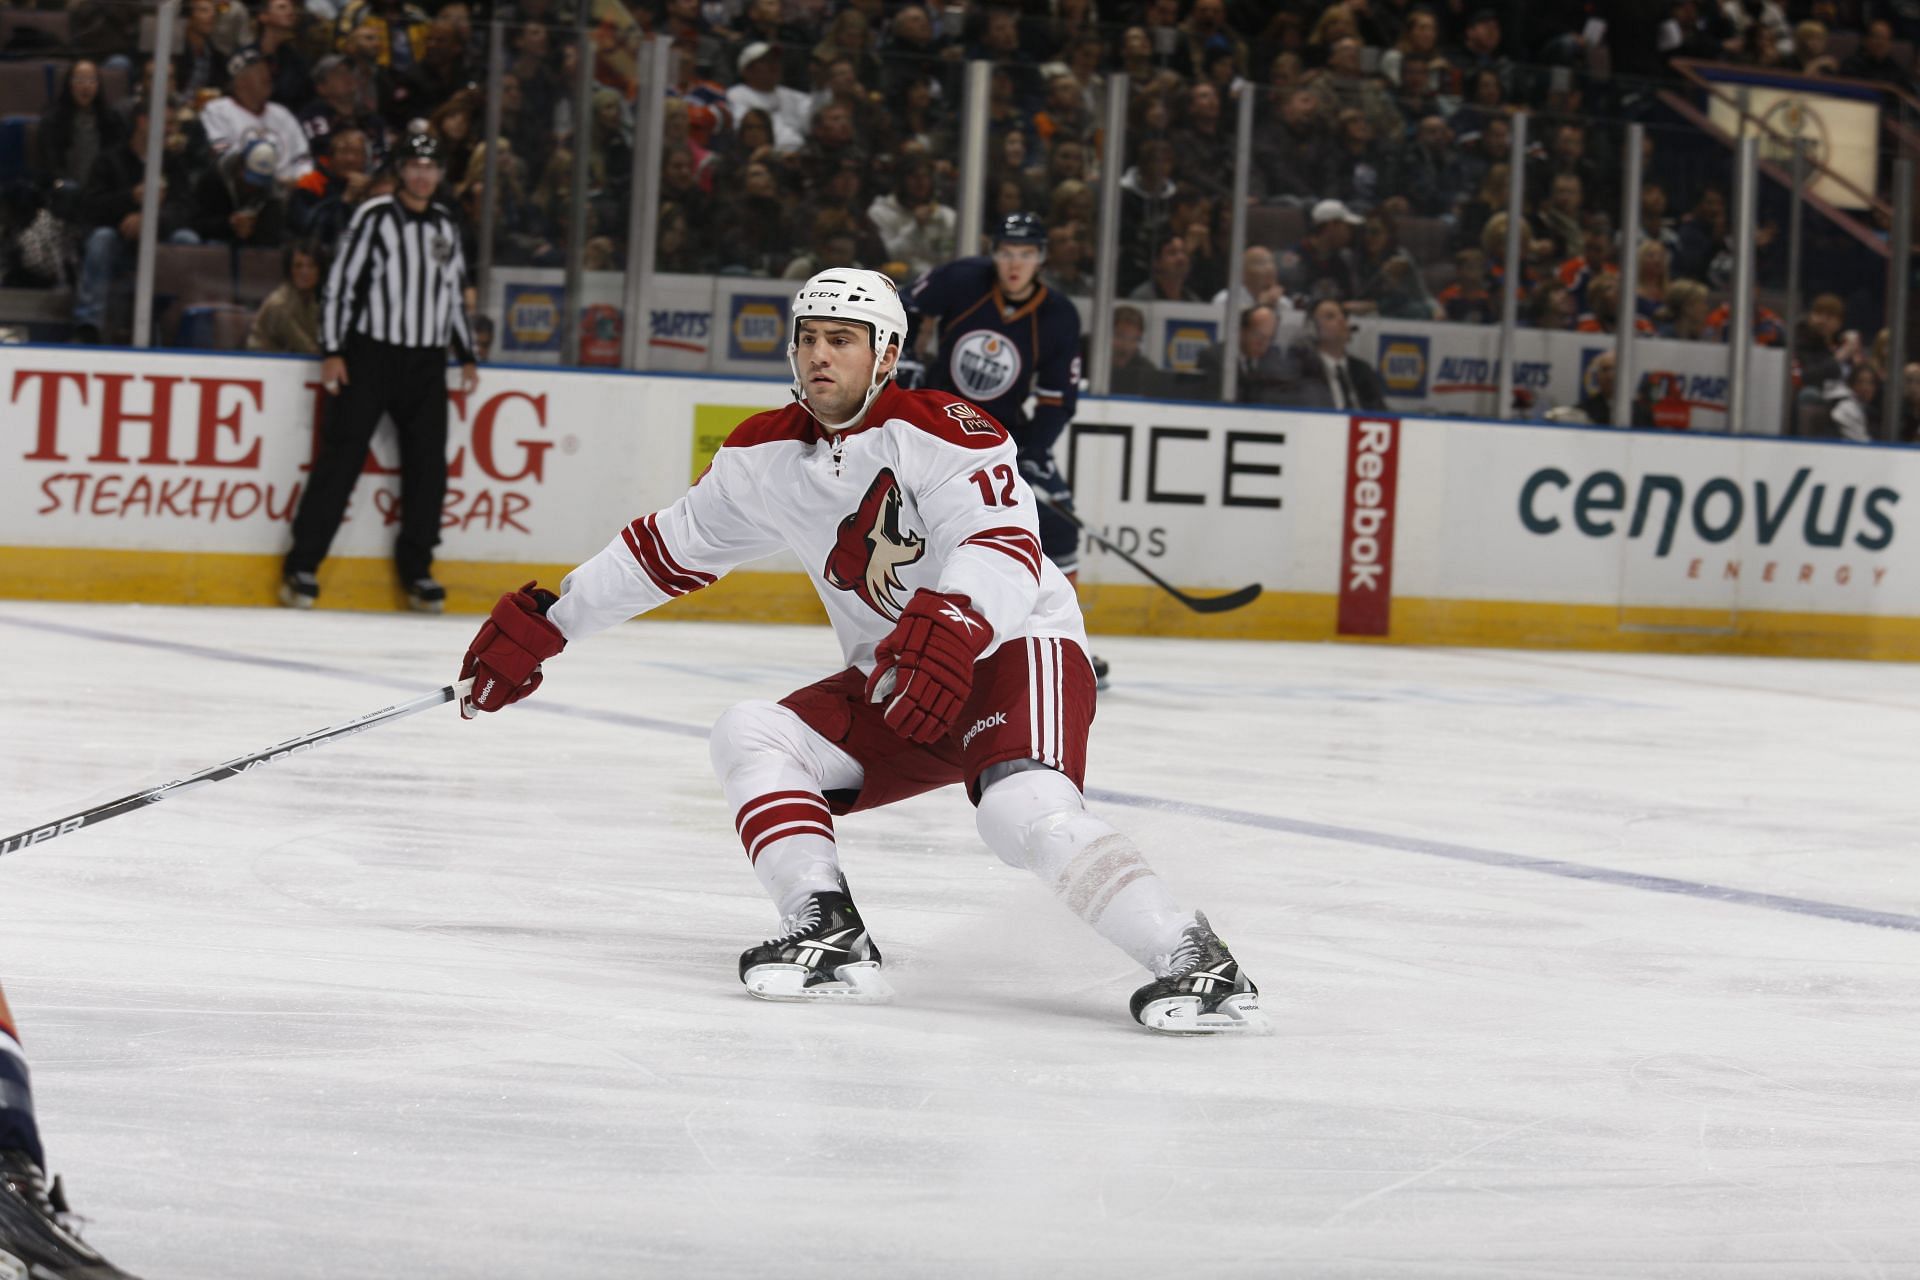 Paul Bissonnette: How community values helped players reach NHL